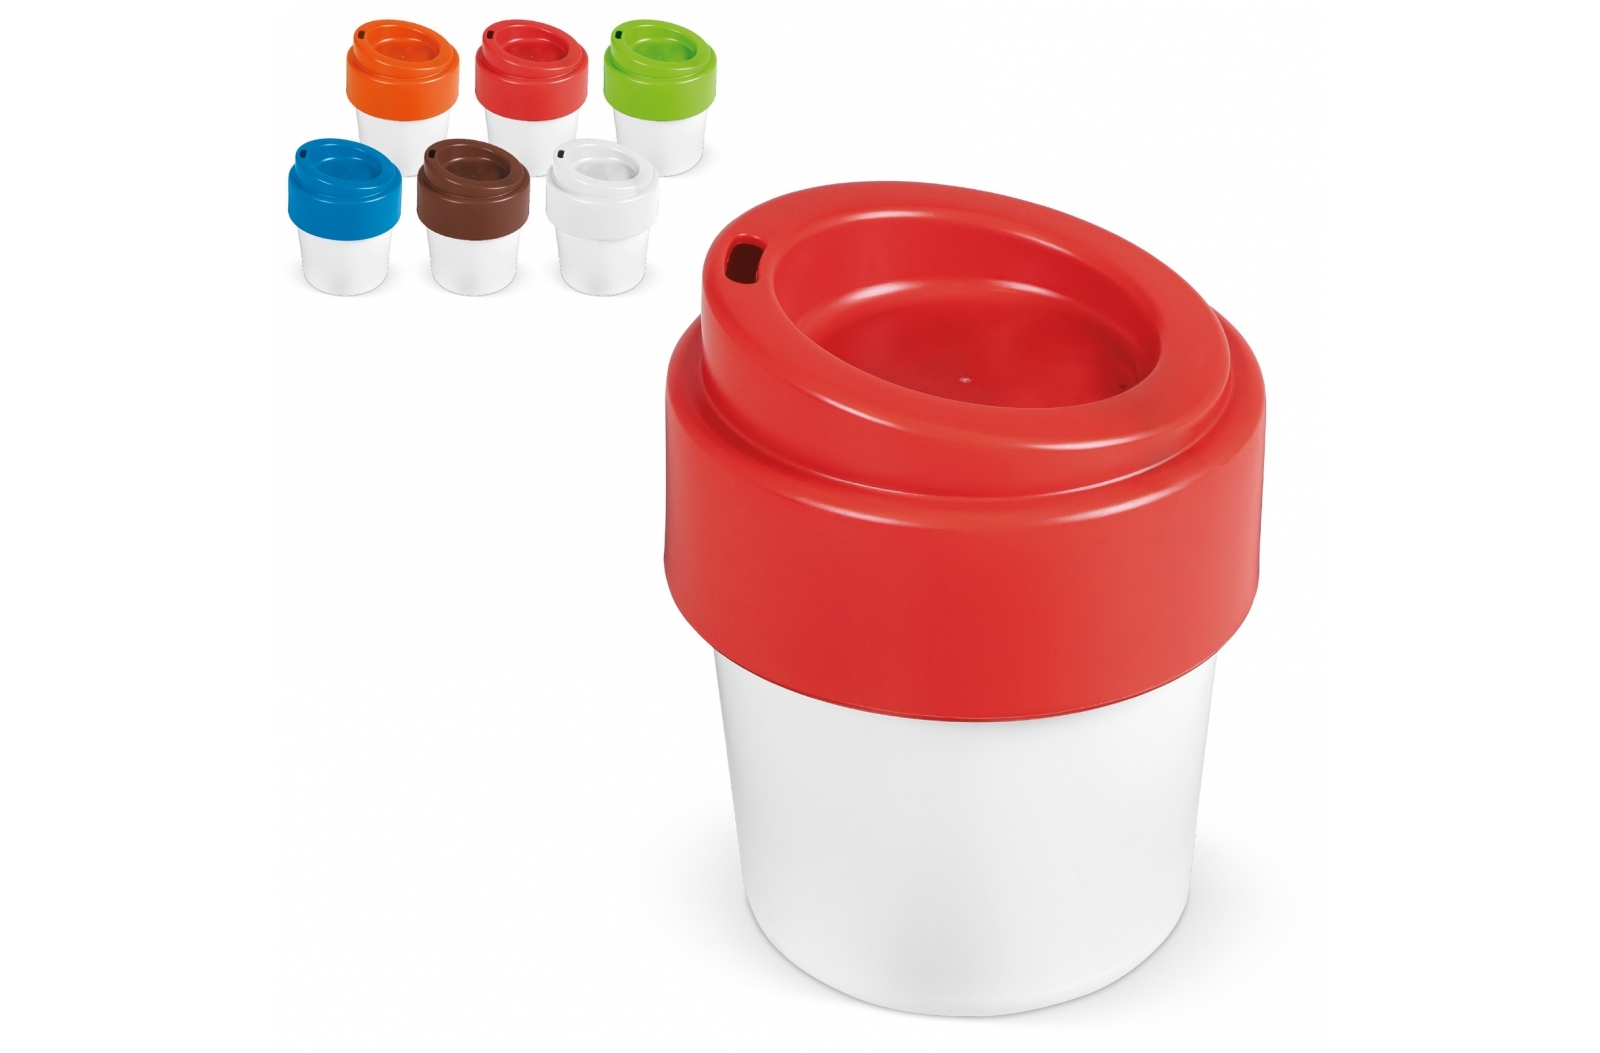 Bio-Plastic Stackable Cup of European Quality - Aycliffe